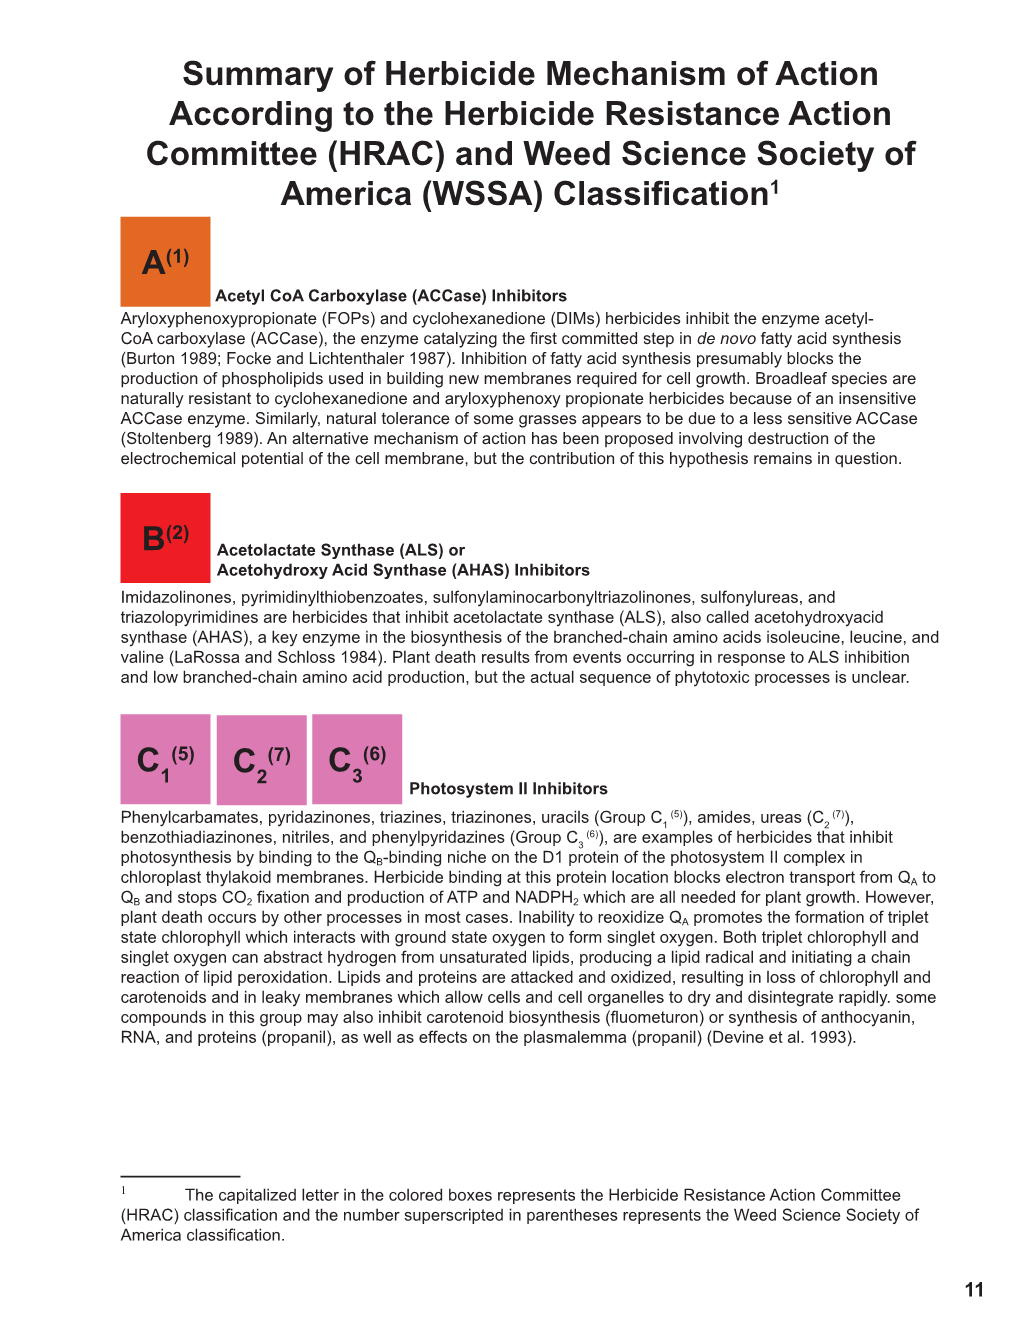 Summary of Herbicide Mechanism of Action According to the Herbicide Resistance Action Committee (HRAC) and Weed Science Society of America (WSSA) Classification